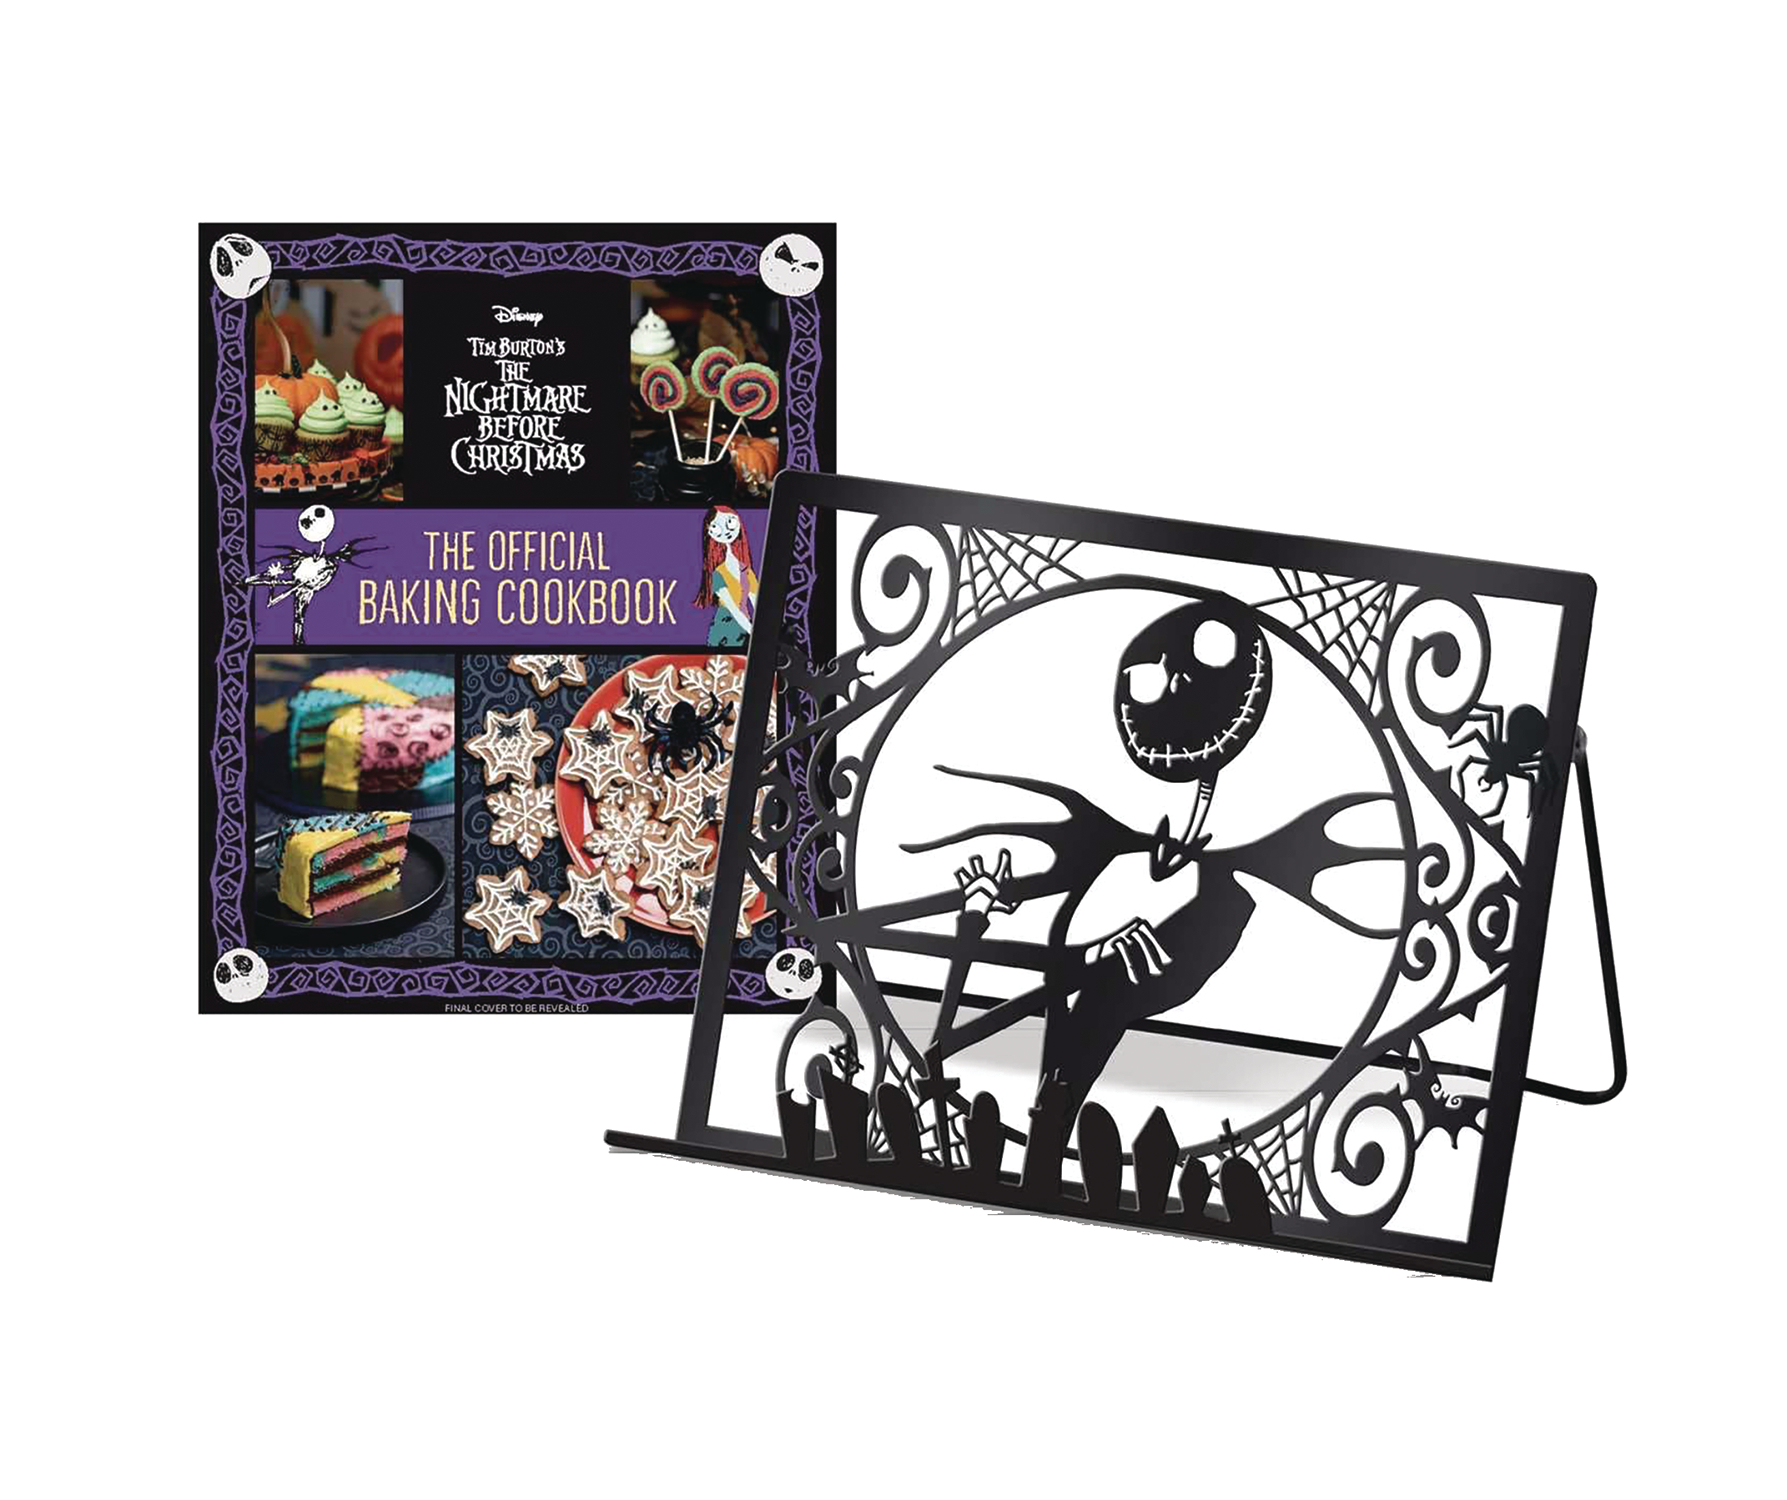 Tim Burtons Nightmare Before Christmas Cookbook Gift Set With Stand